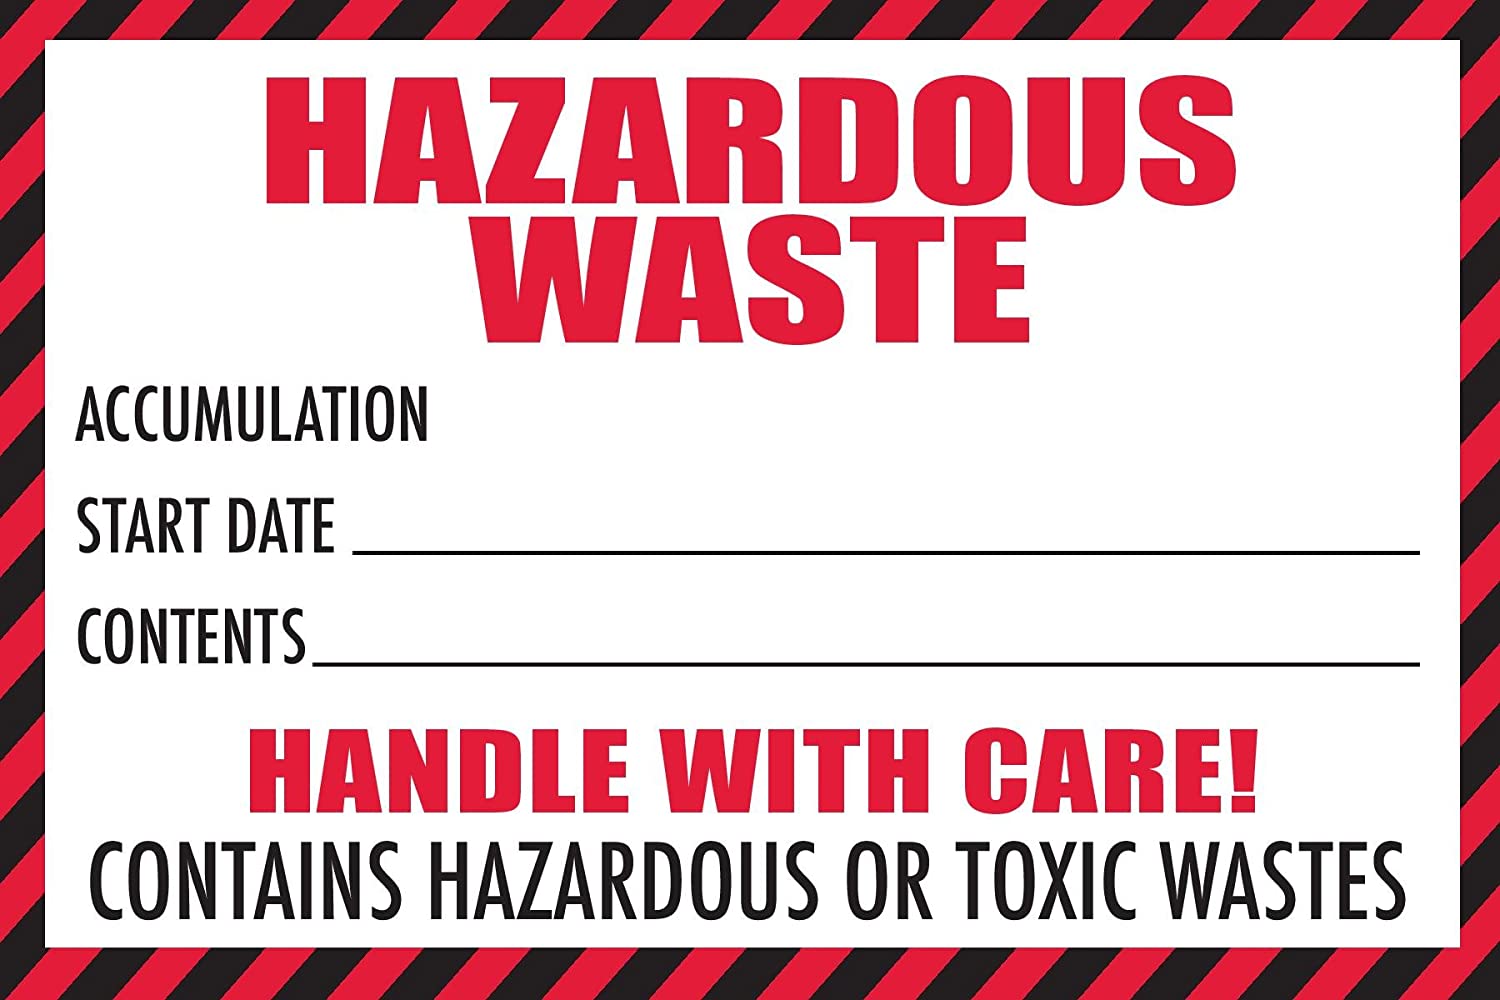 Hazardous Waste Label with Handle with Care, 4"x6" in dimensions